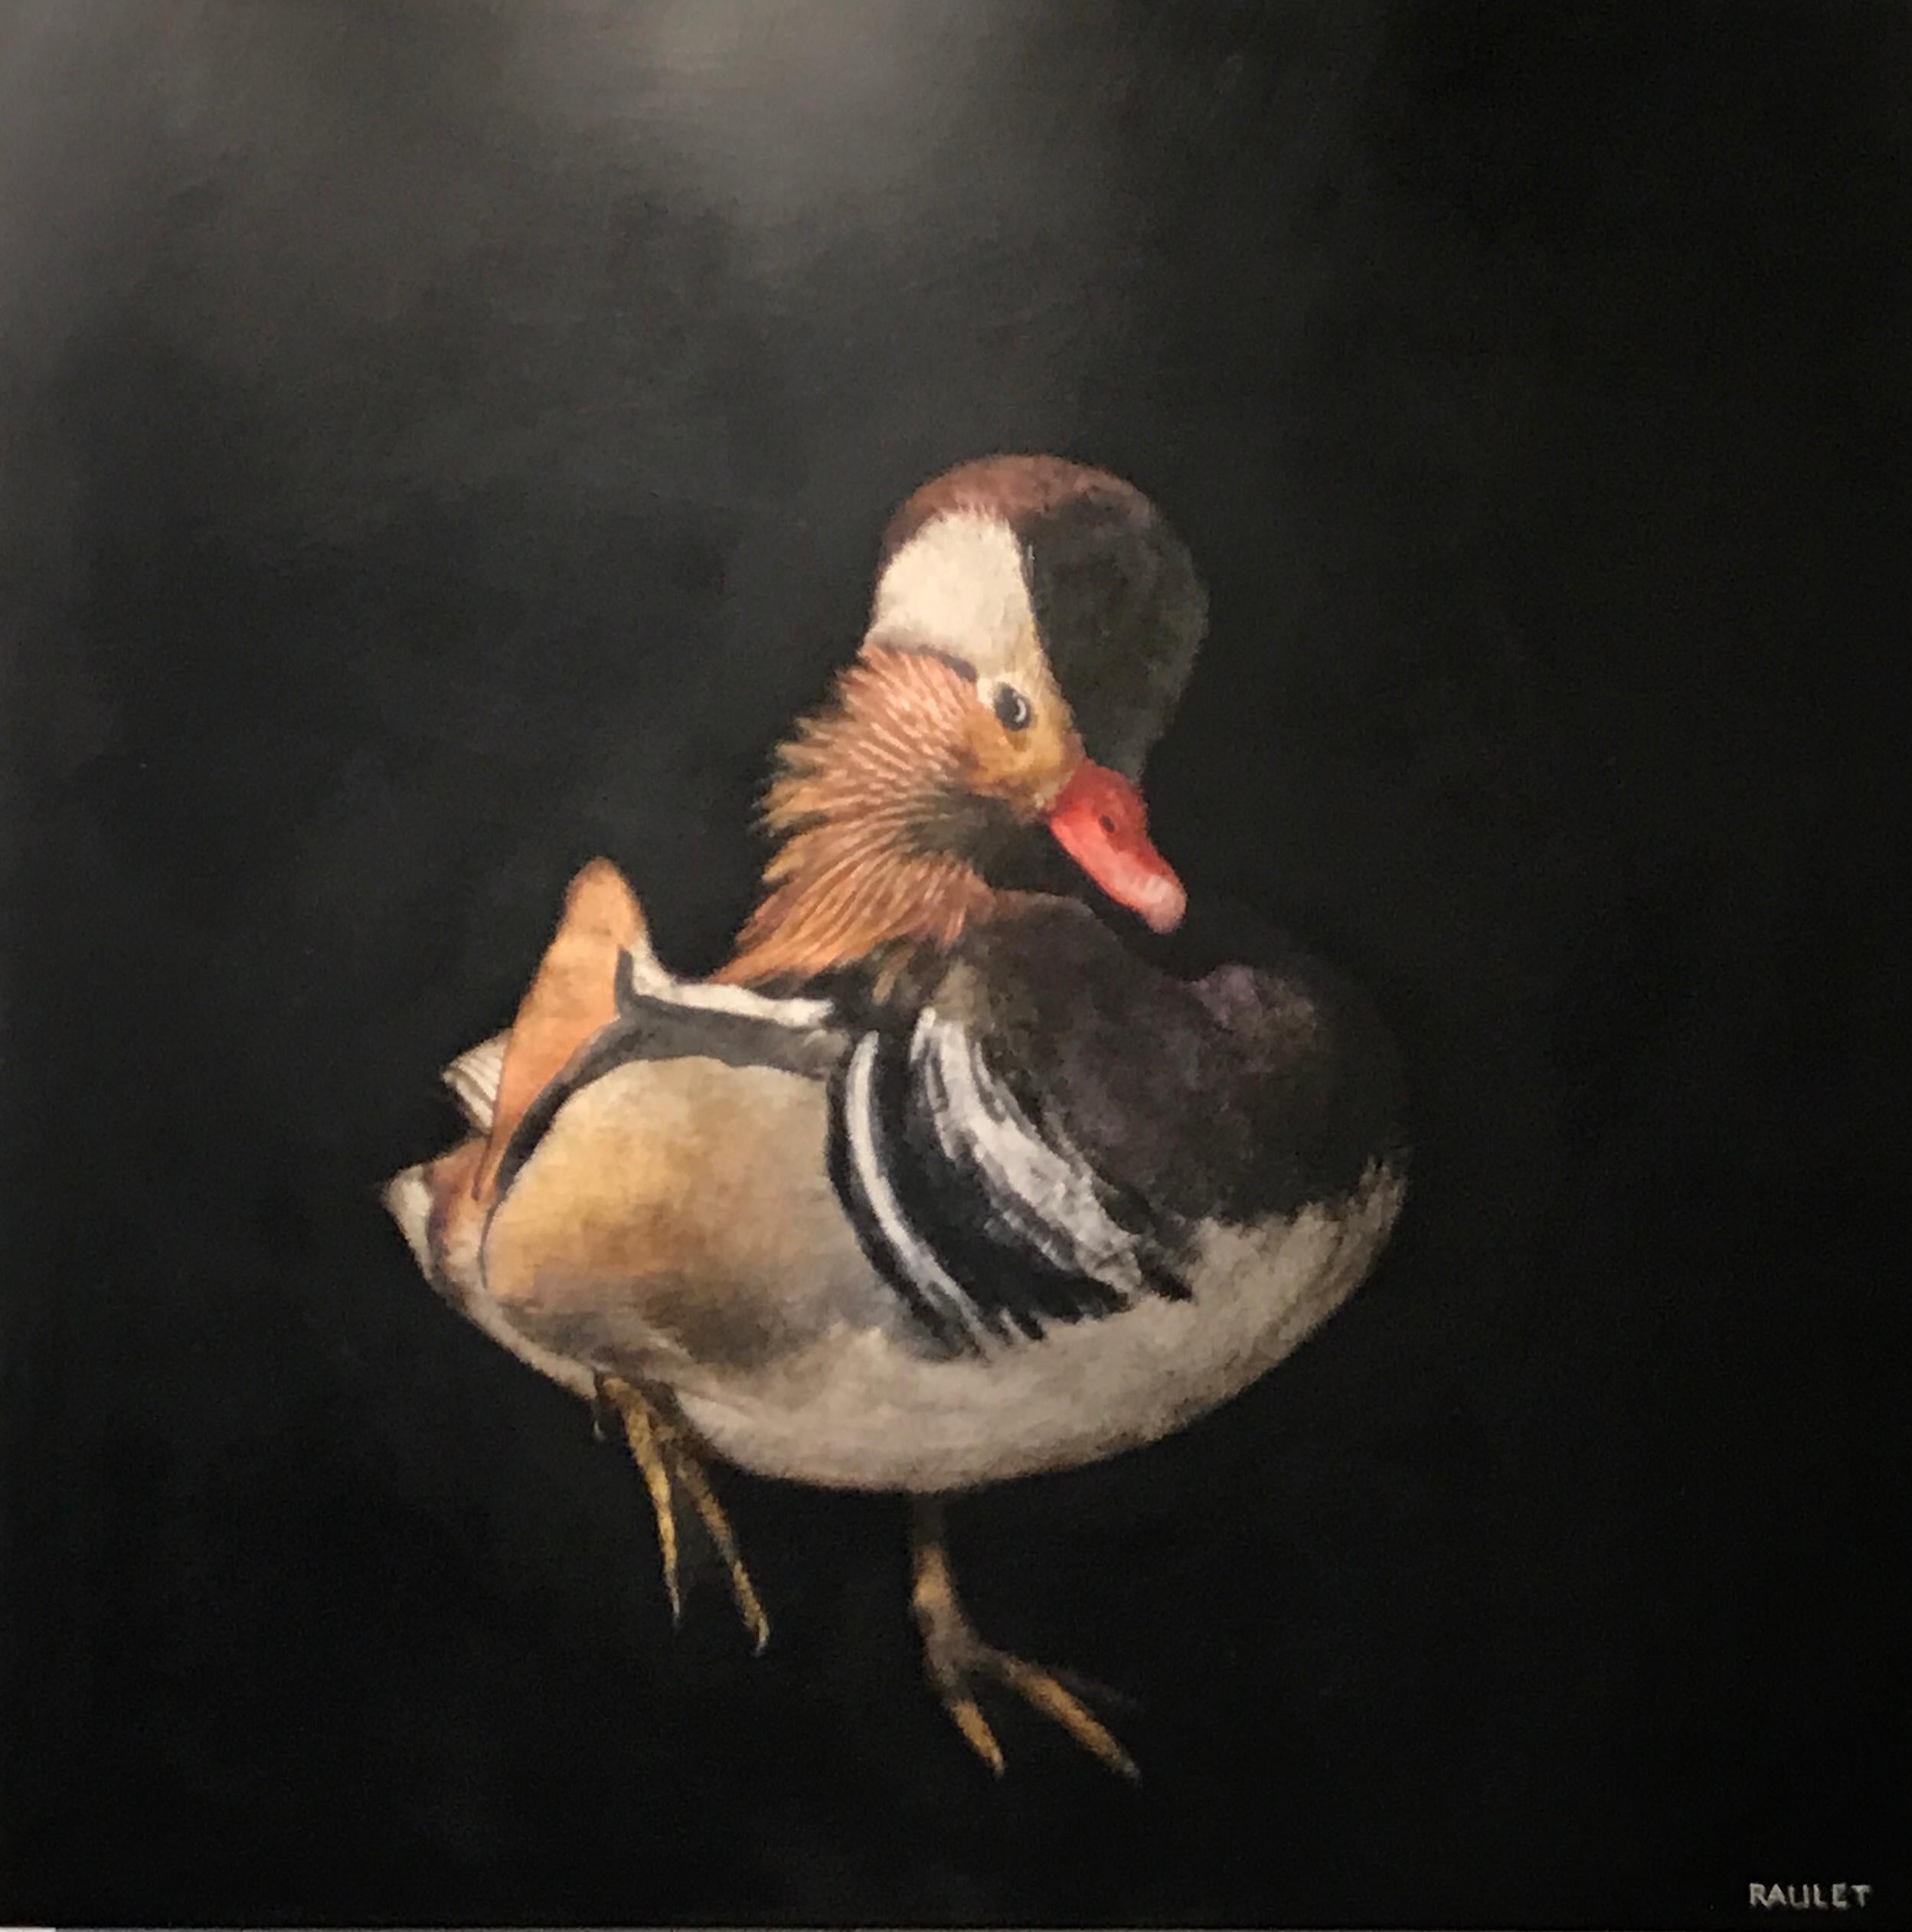 'Hot Lips' is a contemporary medium size mixed media on board animal painting created by Dawne Raulet in 2019. Painted on a dark background allowing our eye to embrace the scene beautifully, an adorable red beaked duck with brown, white and black